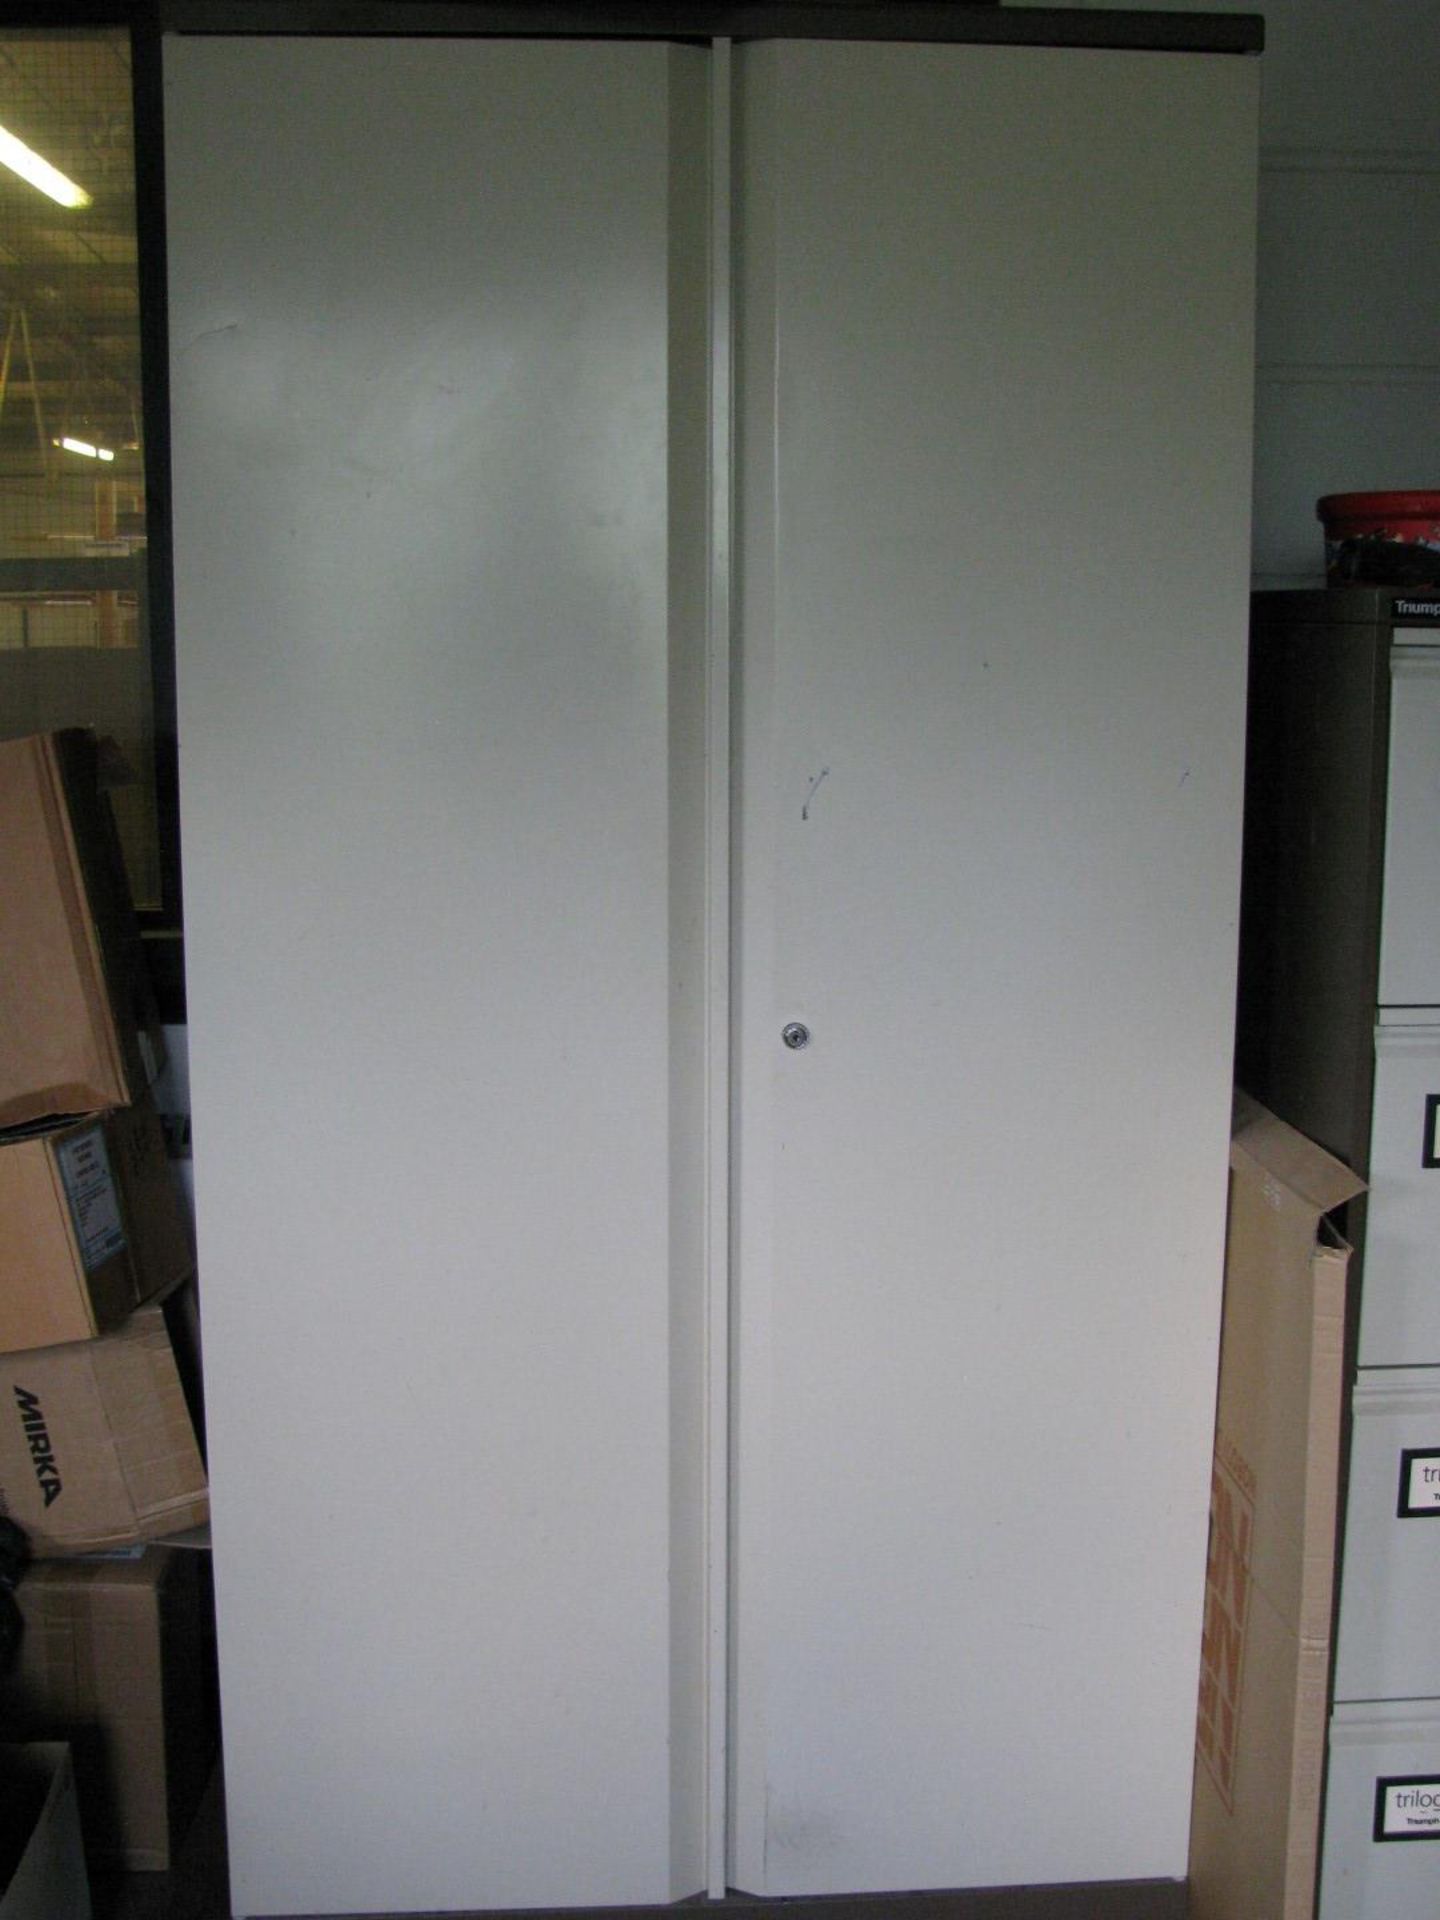 (3) Various steel stationery cupboards